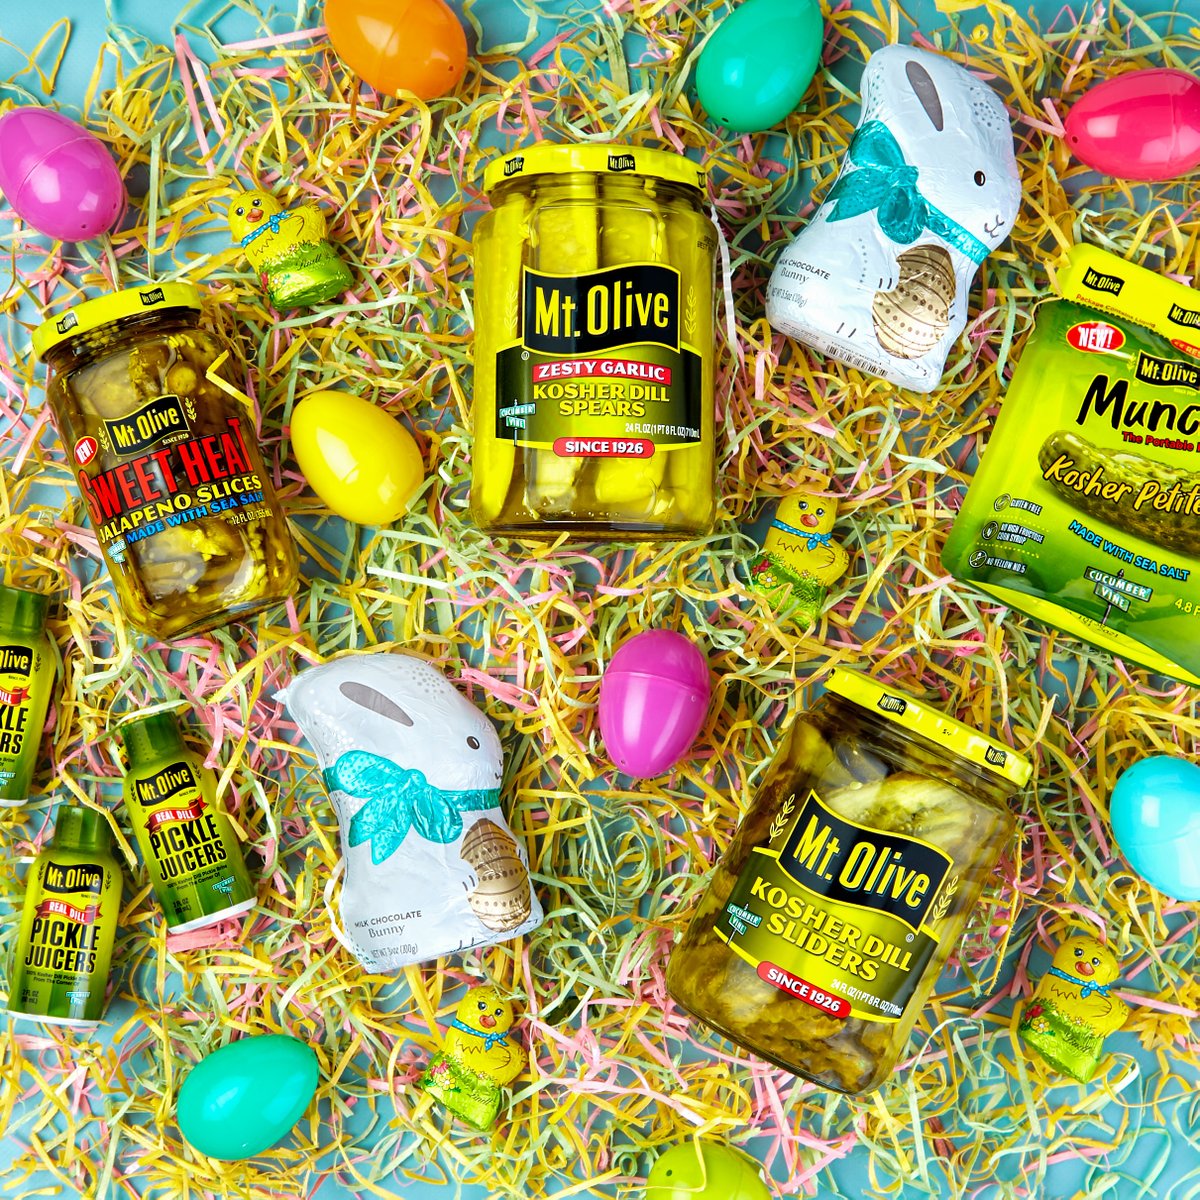 🐰🧺 Which would you rather have in your basket: CHOCOLATE 🍫 or PICKLES 🥒? #HappyEaster 

#MtOlivePickles #MtOlivePickleCo #KosherDill  #Easter #Basket #Bunny #Chocolate #Candy #Munchies #MtOliveMunchies #PickleJuicers #PickleJuice #PickleBrine #PickleLovers #ILovePickles